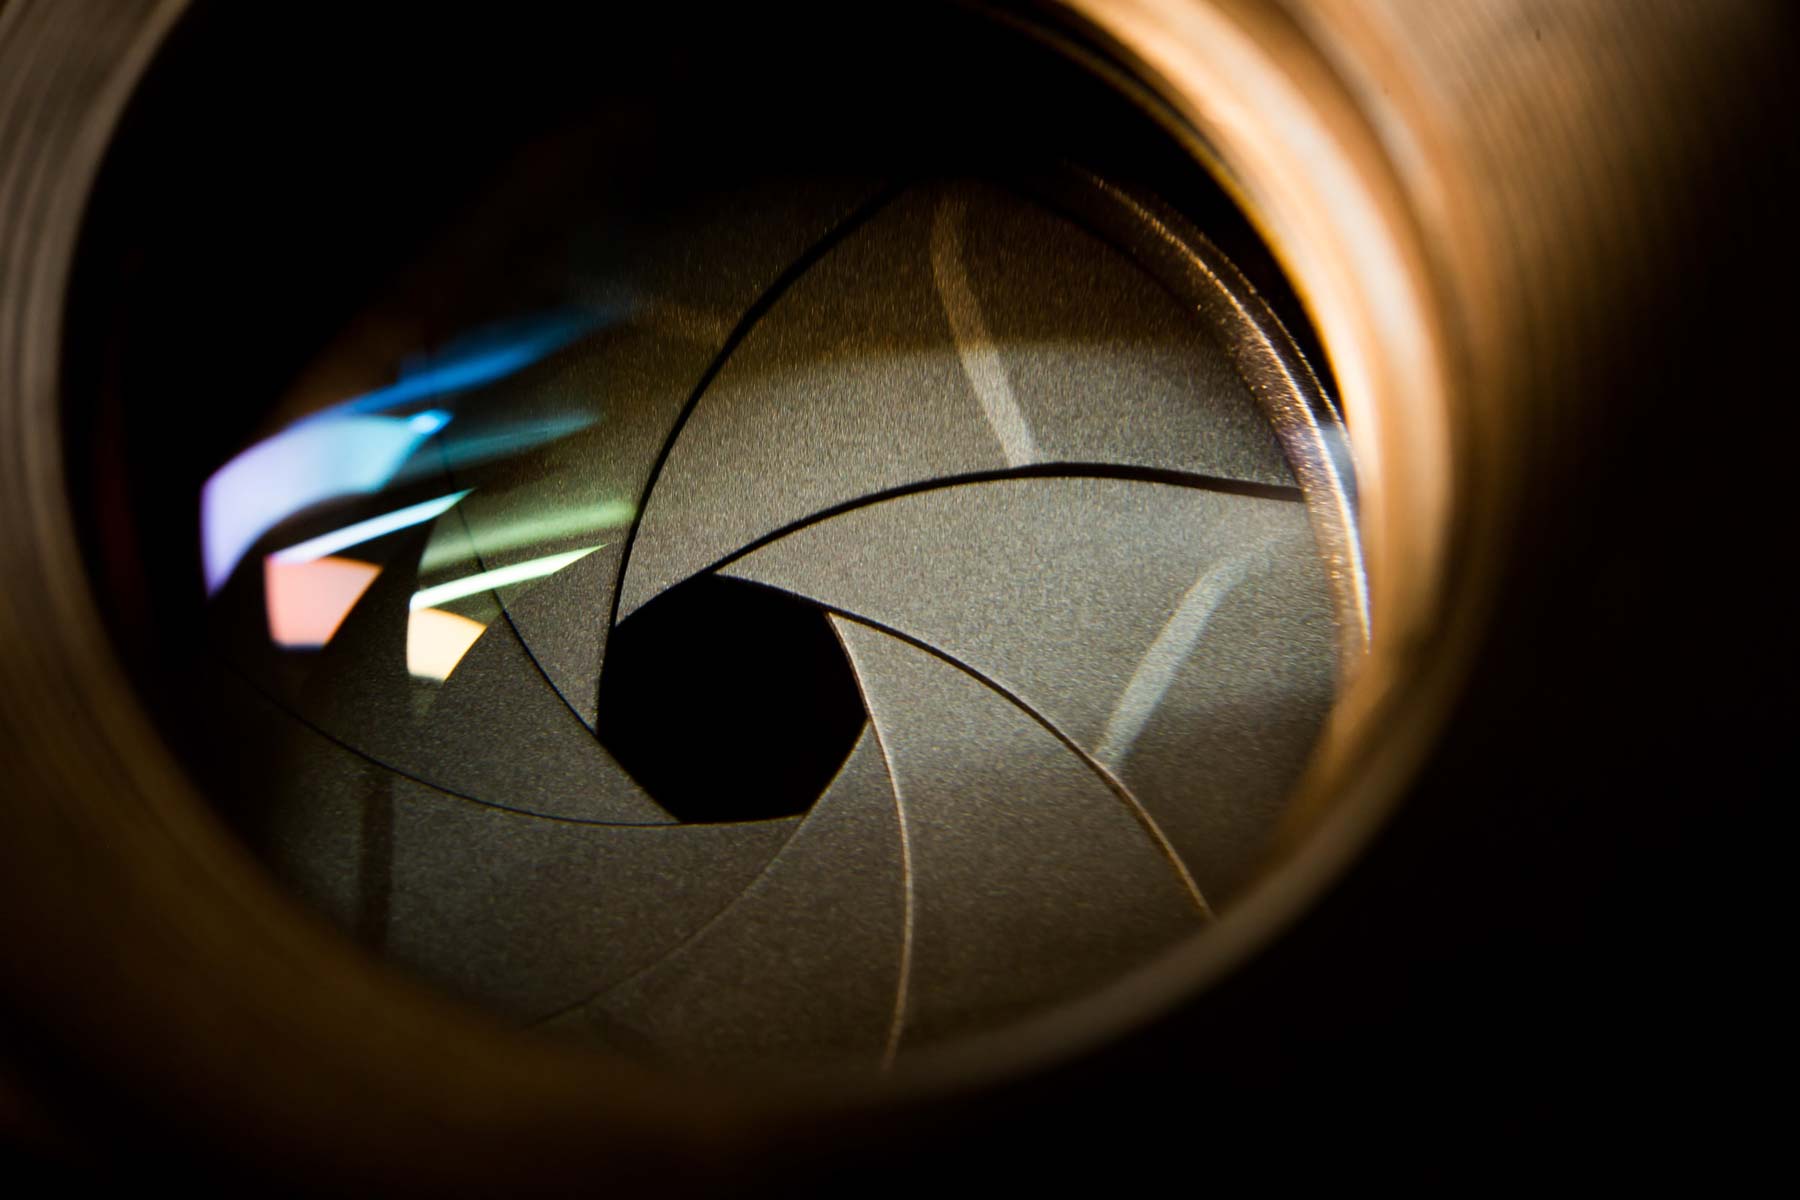 Image of an aperture on a camera lens for article on street photography aperture priority mode